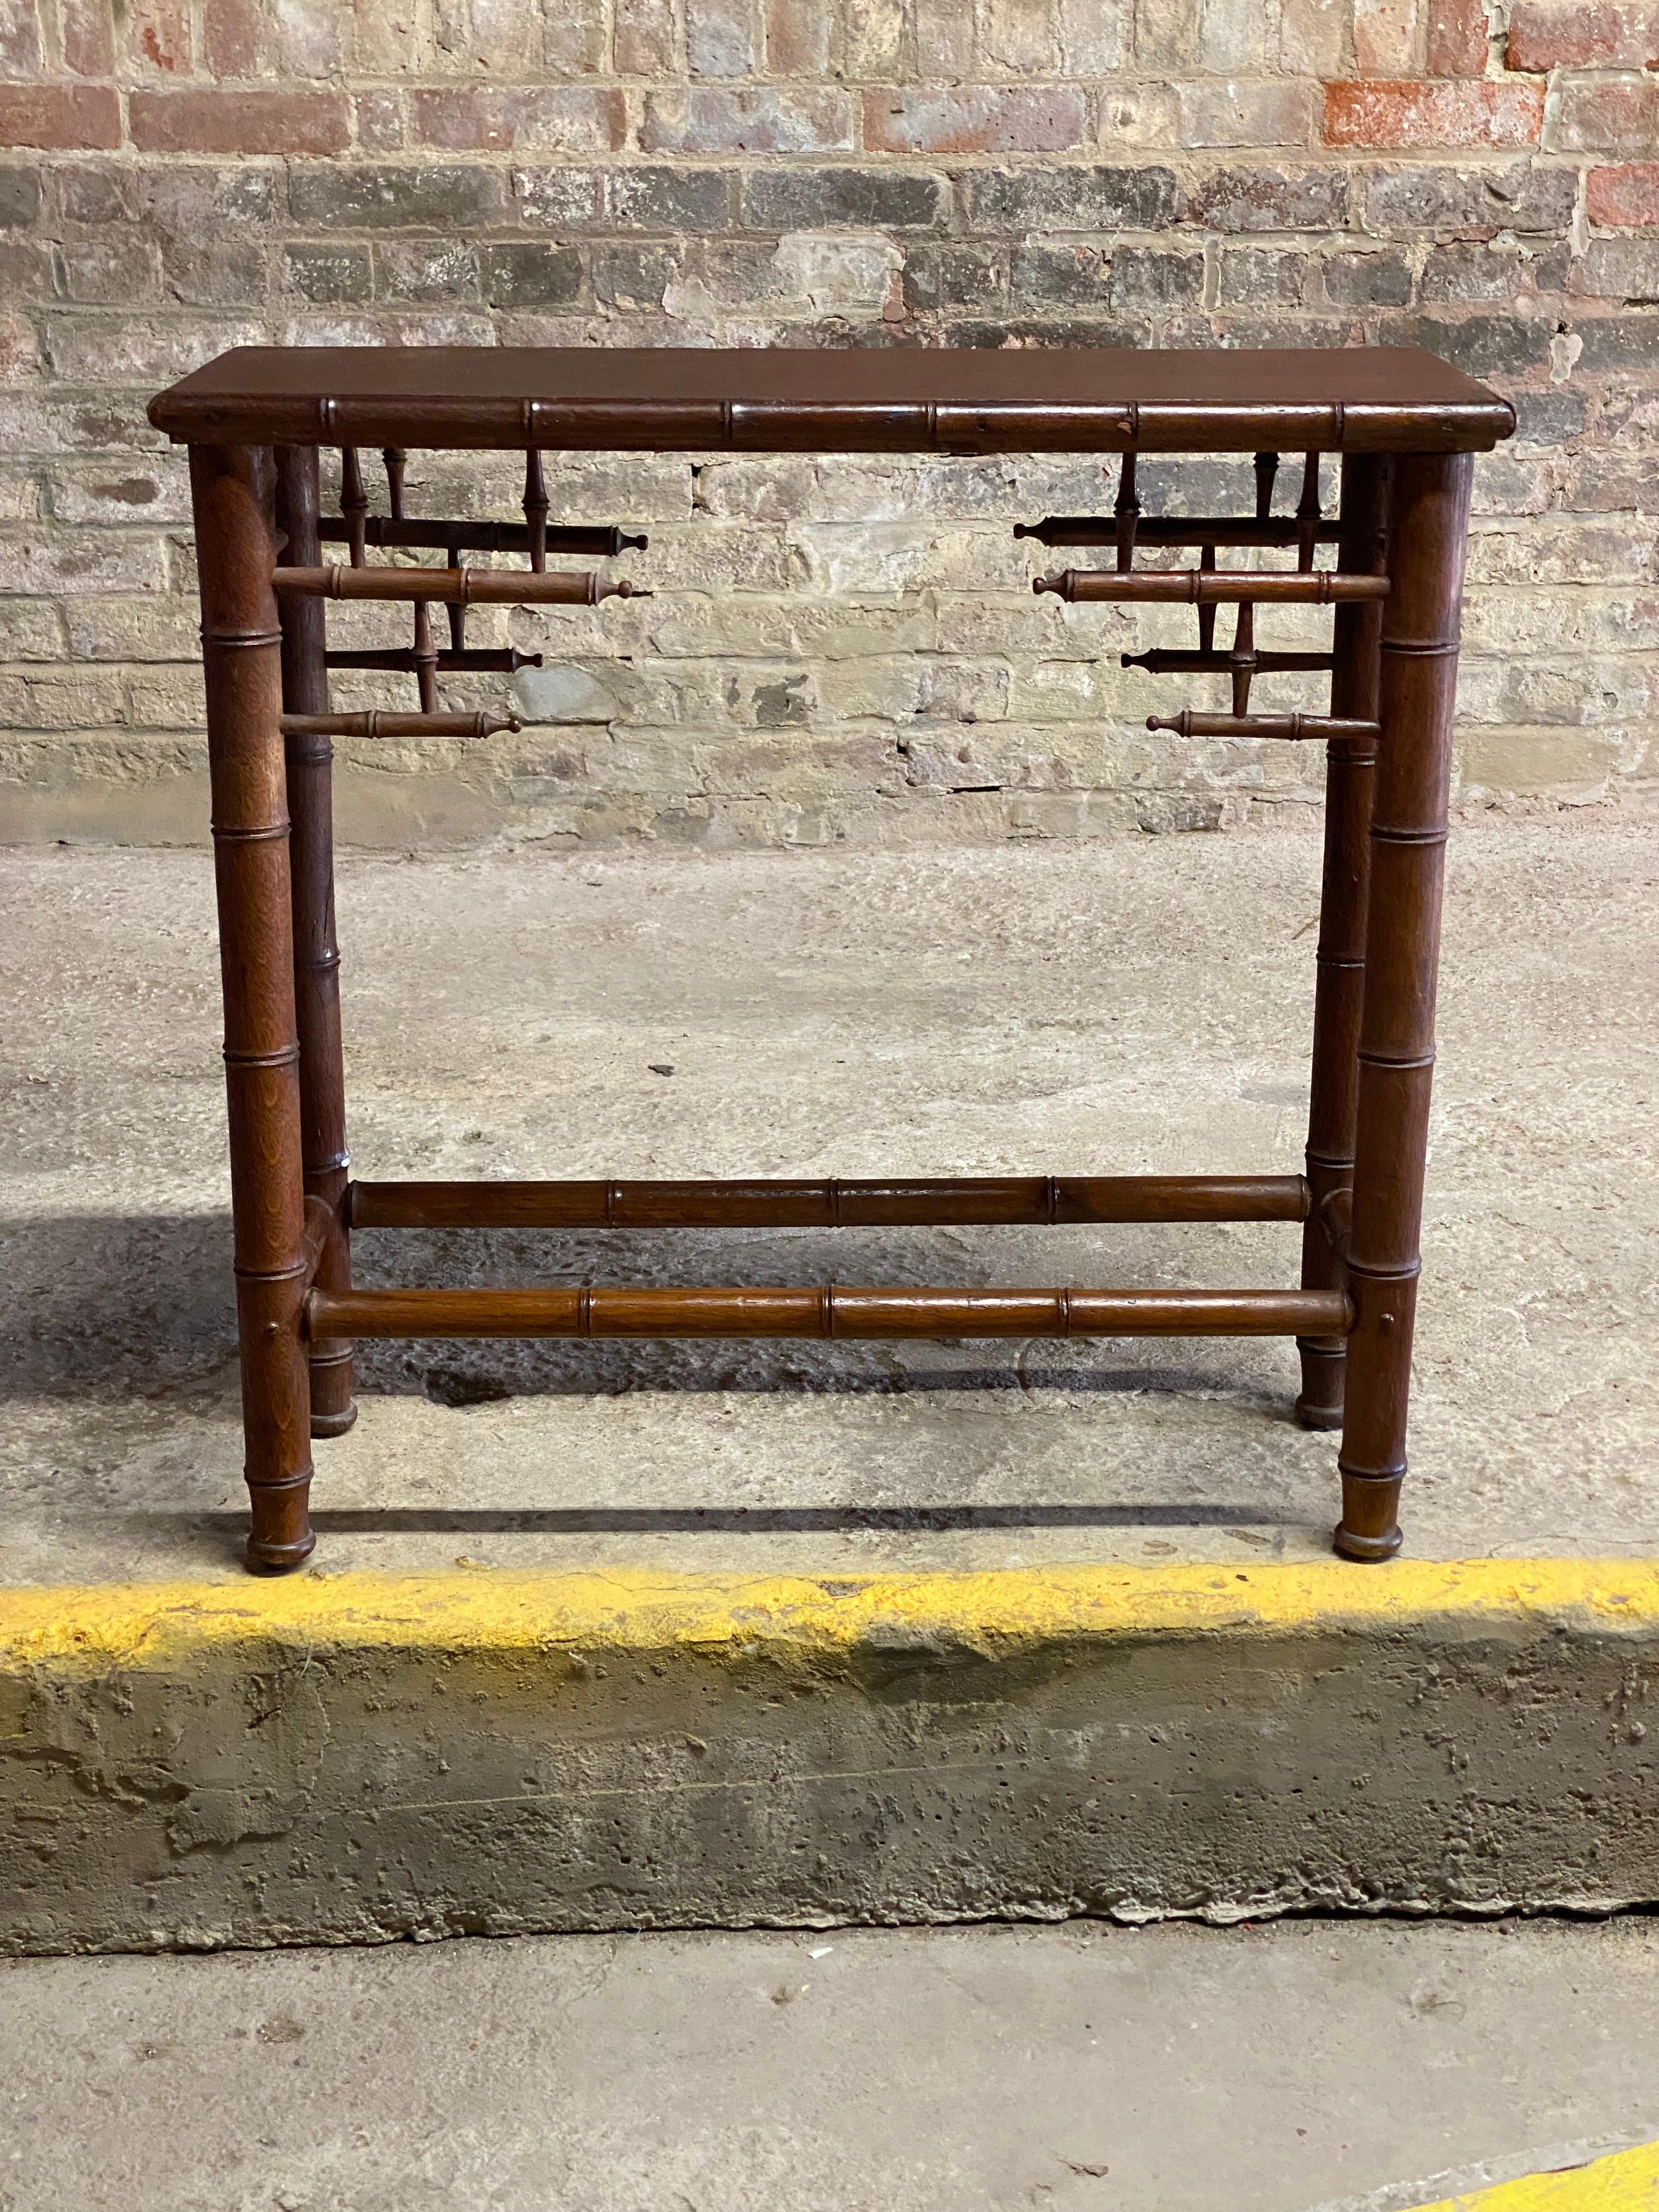 Very good quality Victorian Asian inspired faux bamboo console table. It's very small foot print is a great accent table for a tight area like a hallway or a bathroom. The legs, spindles and top are all oak carved to resemble bamboo. Circa